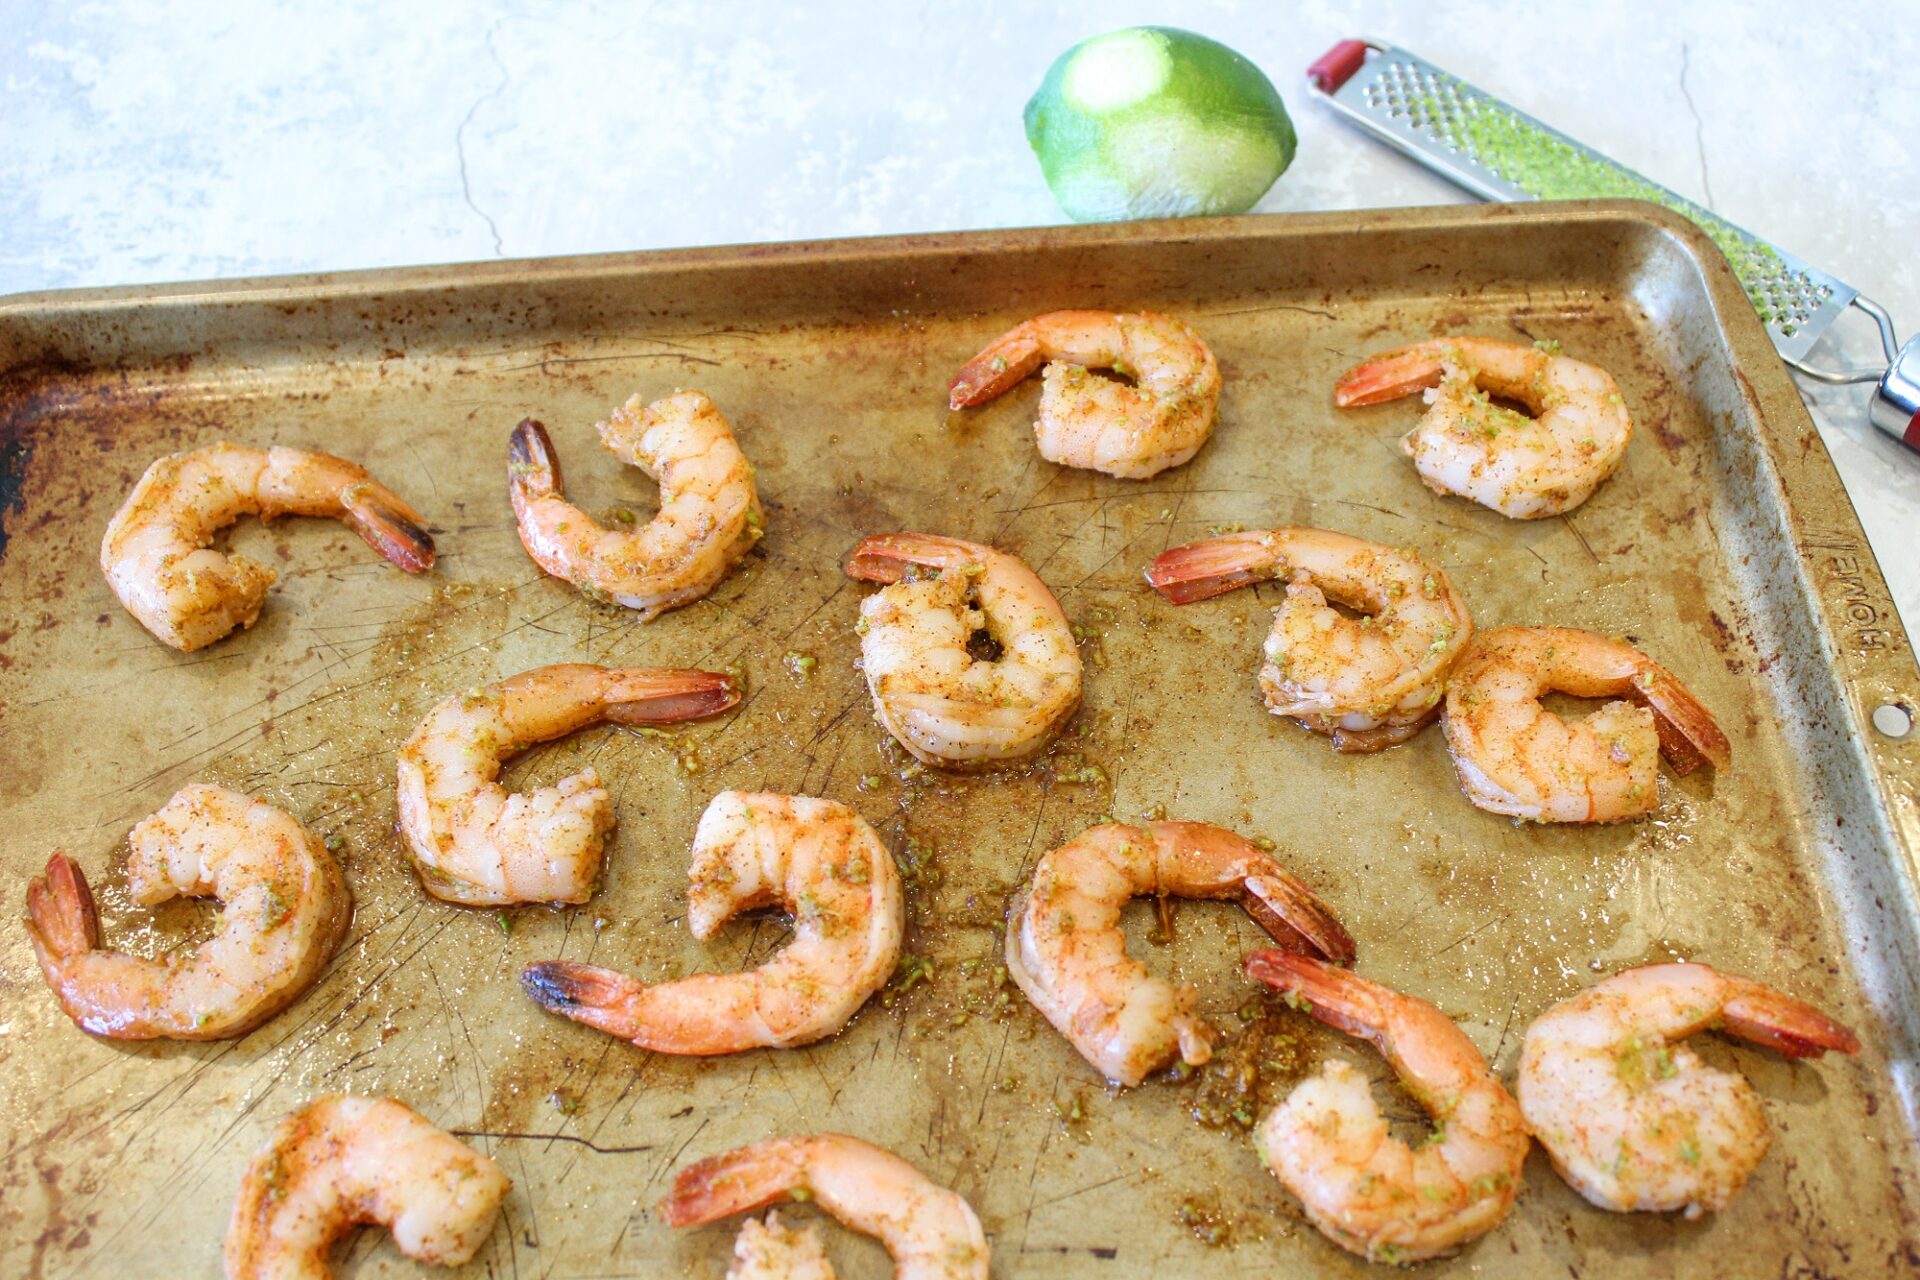 Cooked shrimp on a baking sheet.